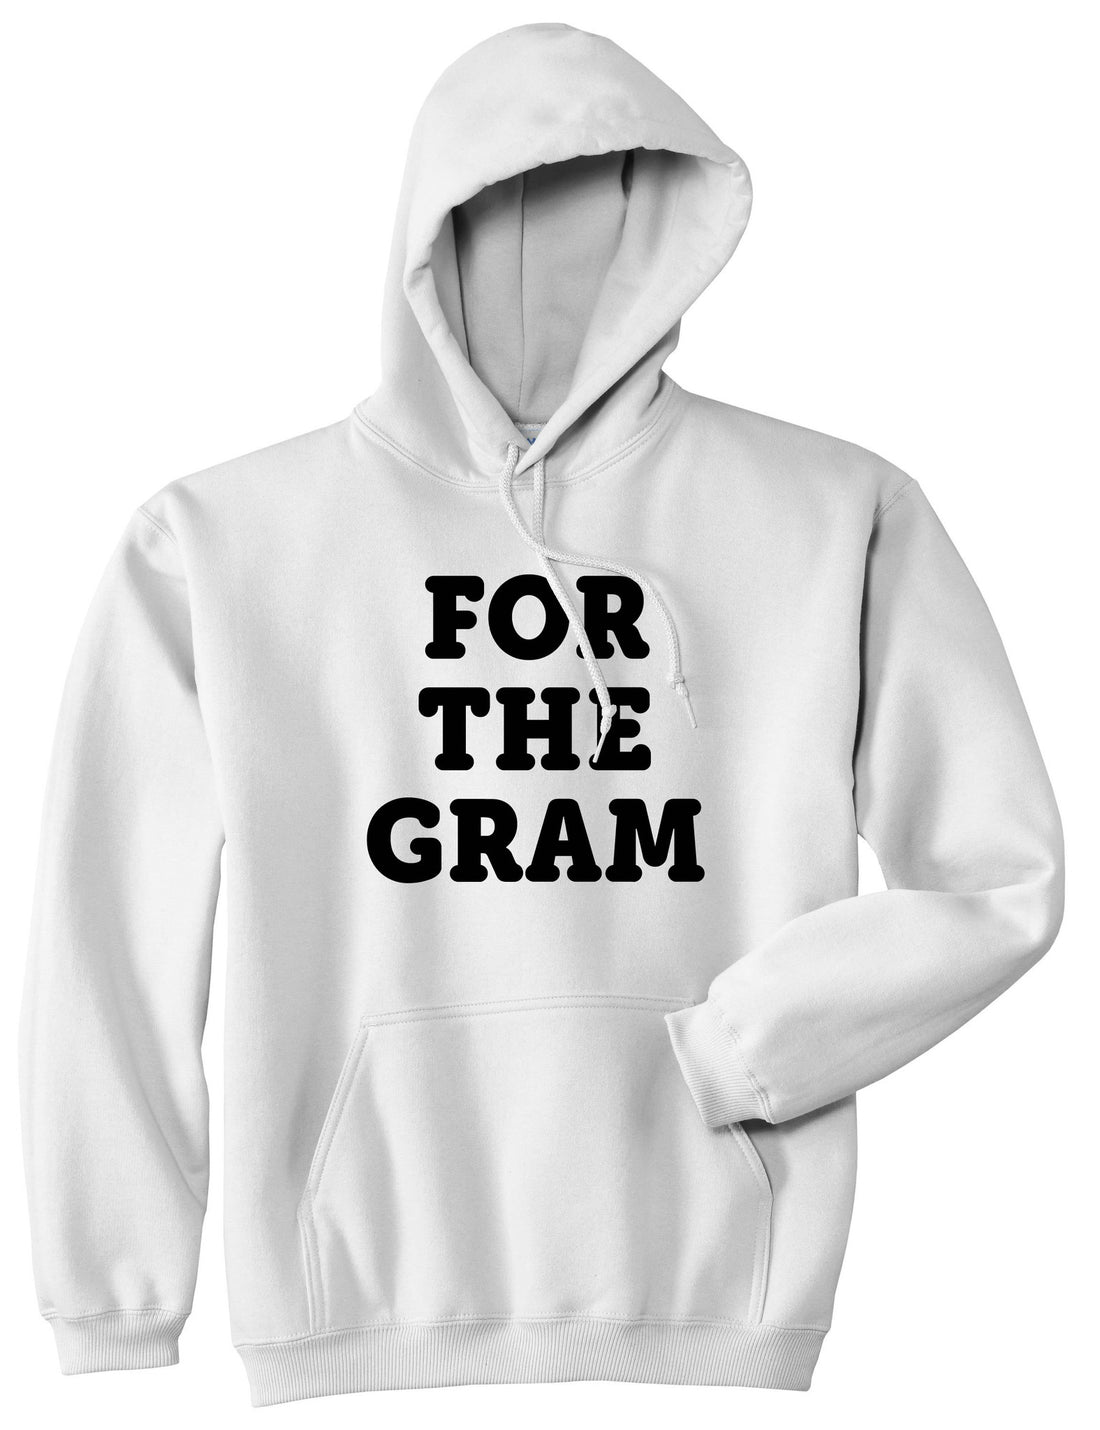 Do It For The Gram Pullover Hoodie Hoody by Kings Of NY